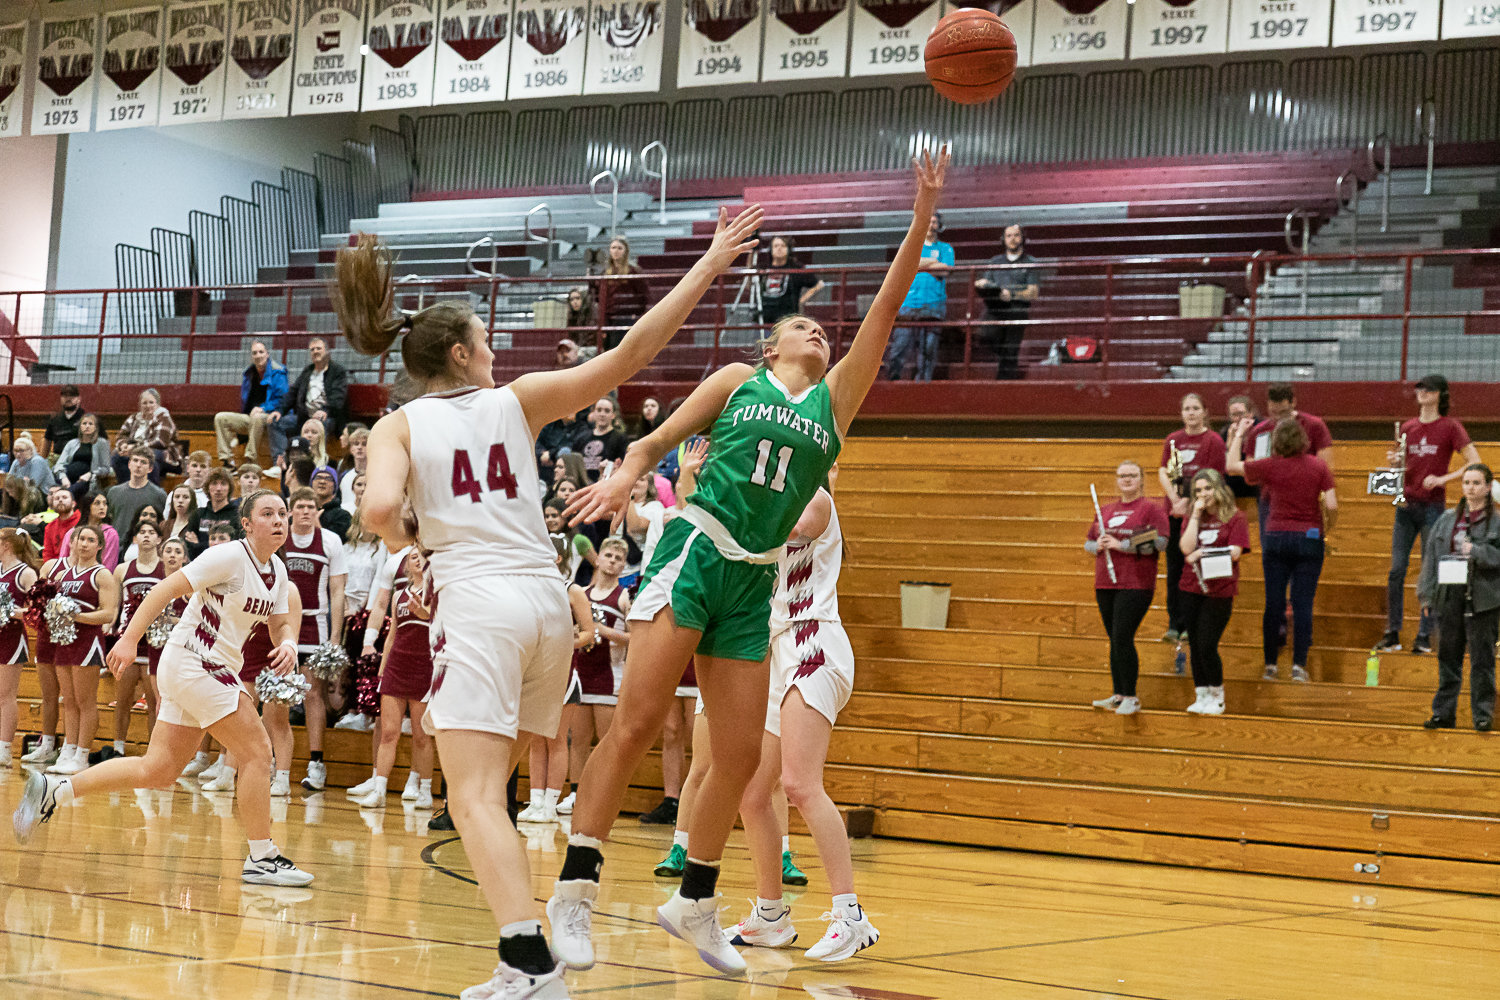 Tumwater guard Kylie Waltermeyer makes a scoop shot against W.F. West Jan. 26.